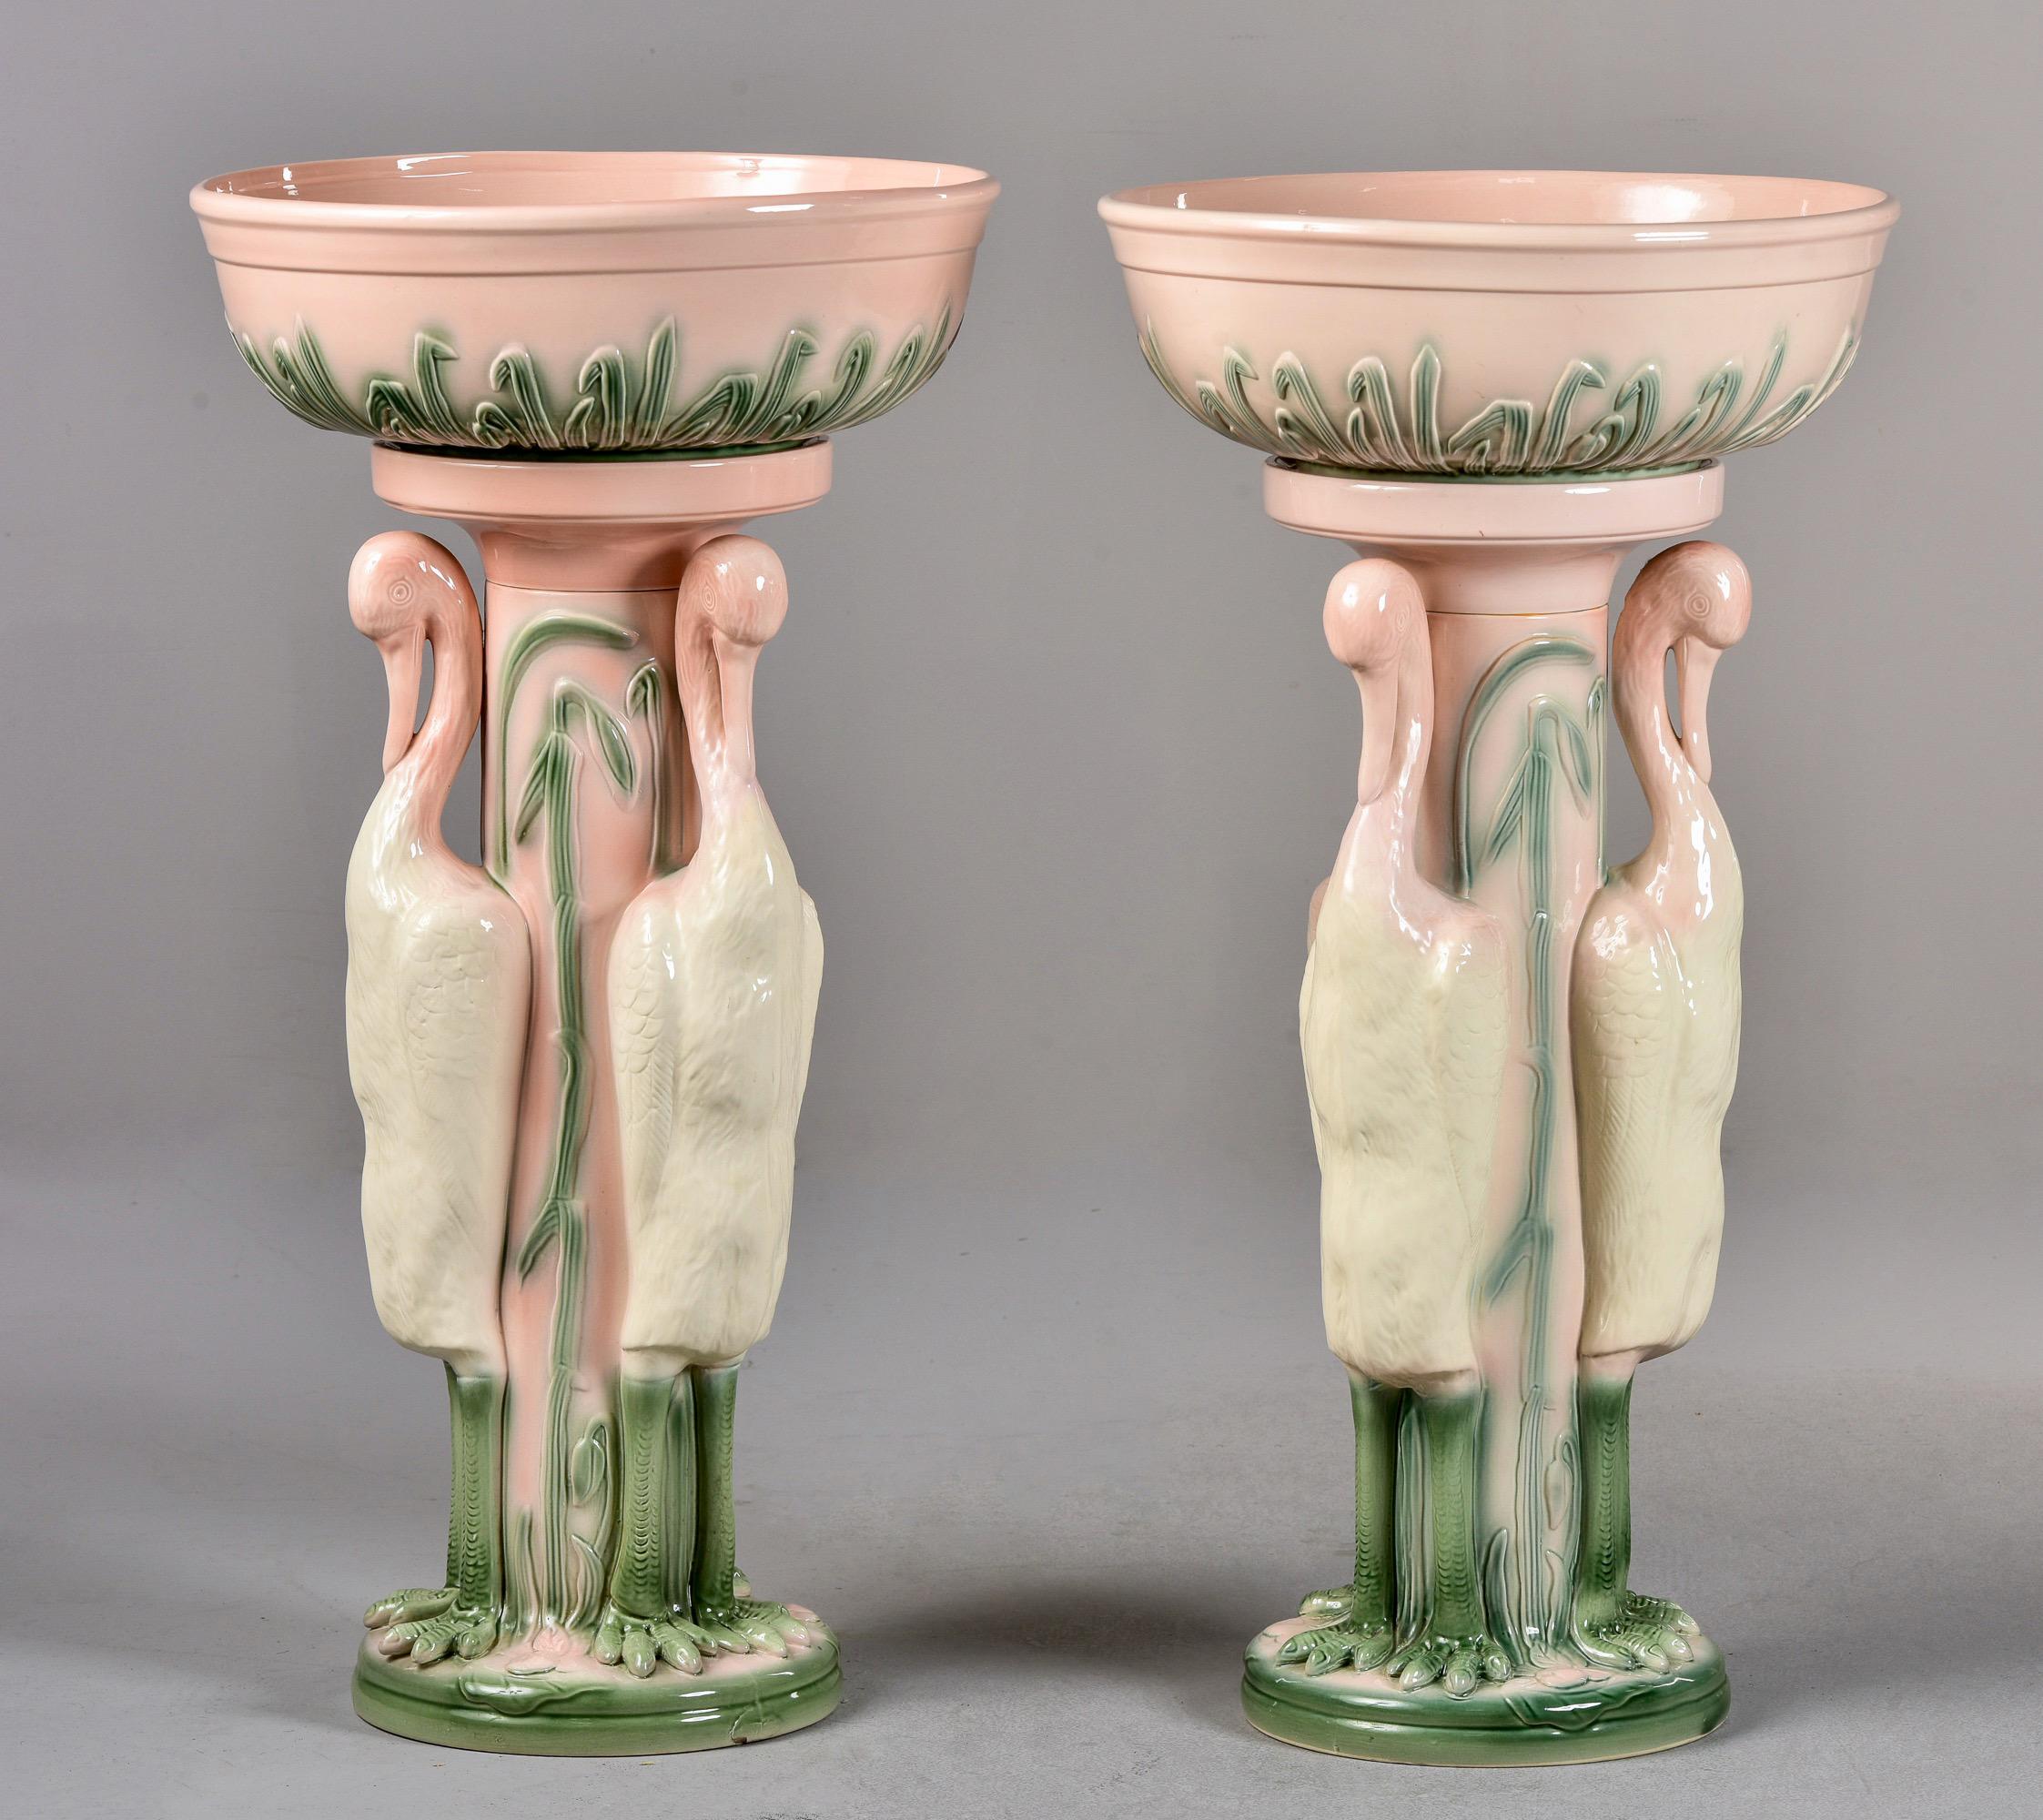 Circa 1970 pair of English tall porcelain flamingo jardinieres signed by Blakeney of England. Each jardiniere features a base surrounded by three standing flamingos and a large, removable bowl. Assembled, each jardiniere is 31” tall. One of the